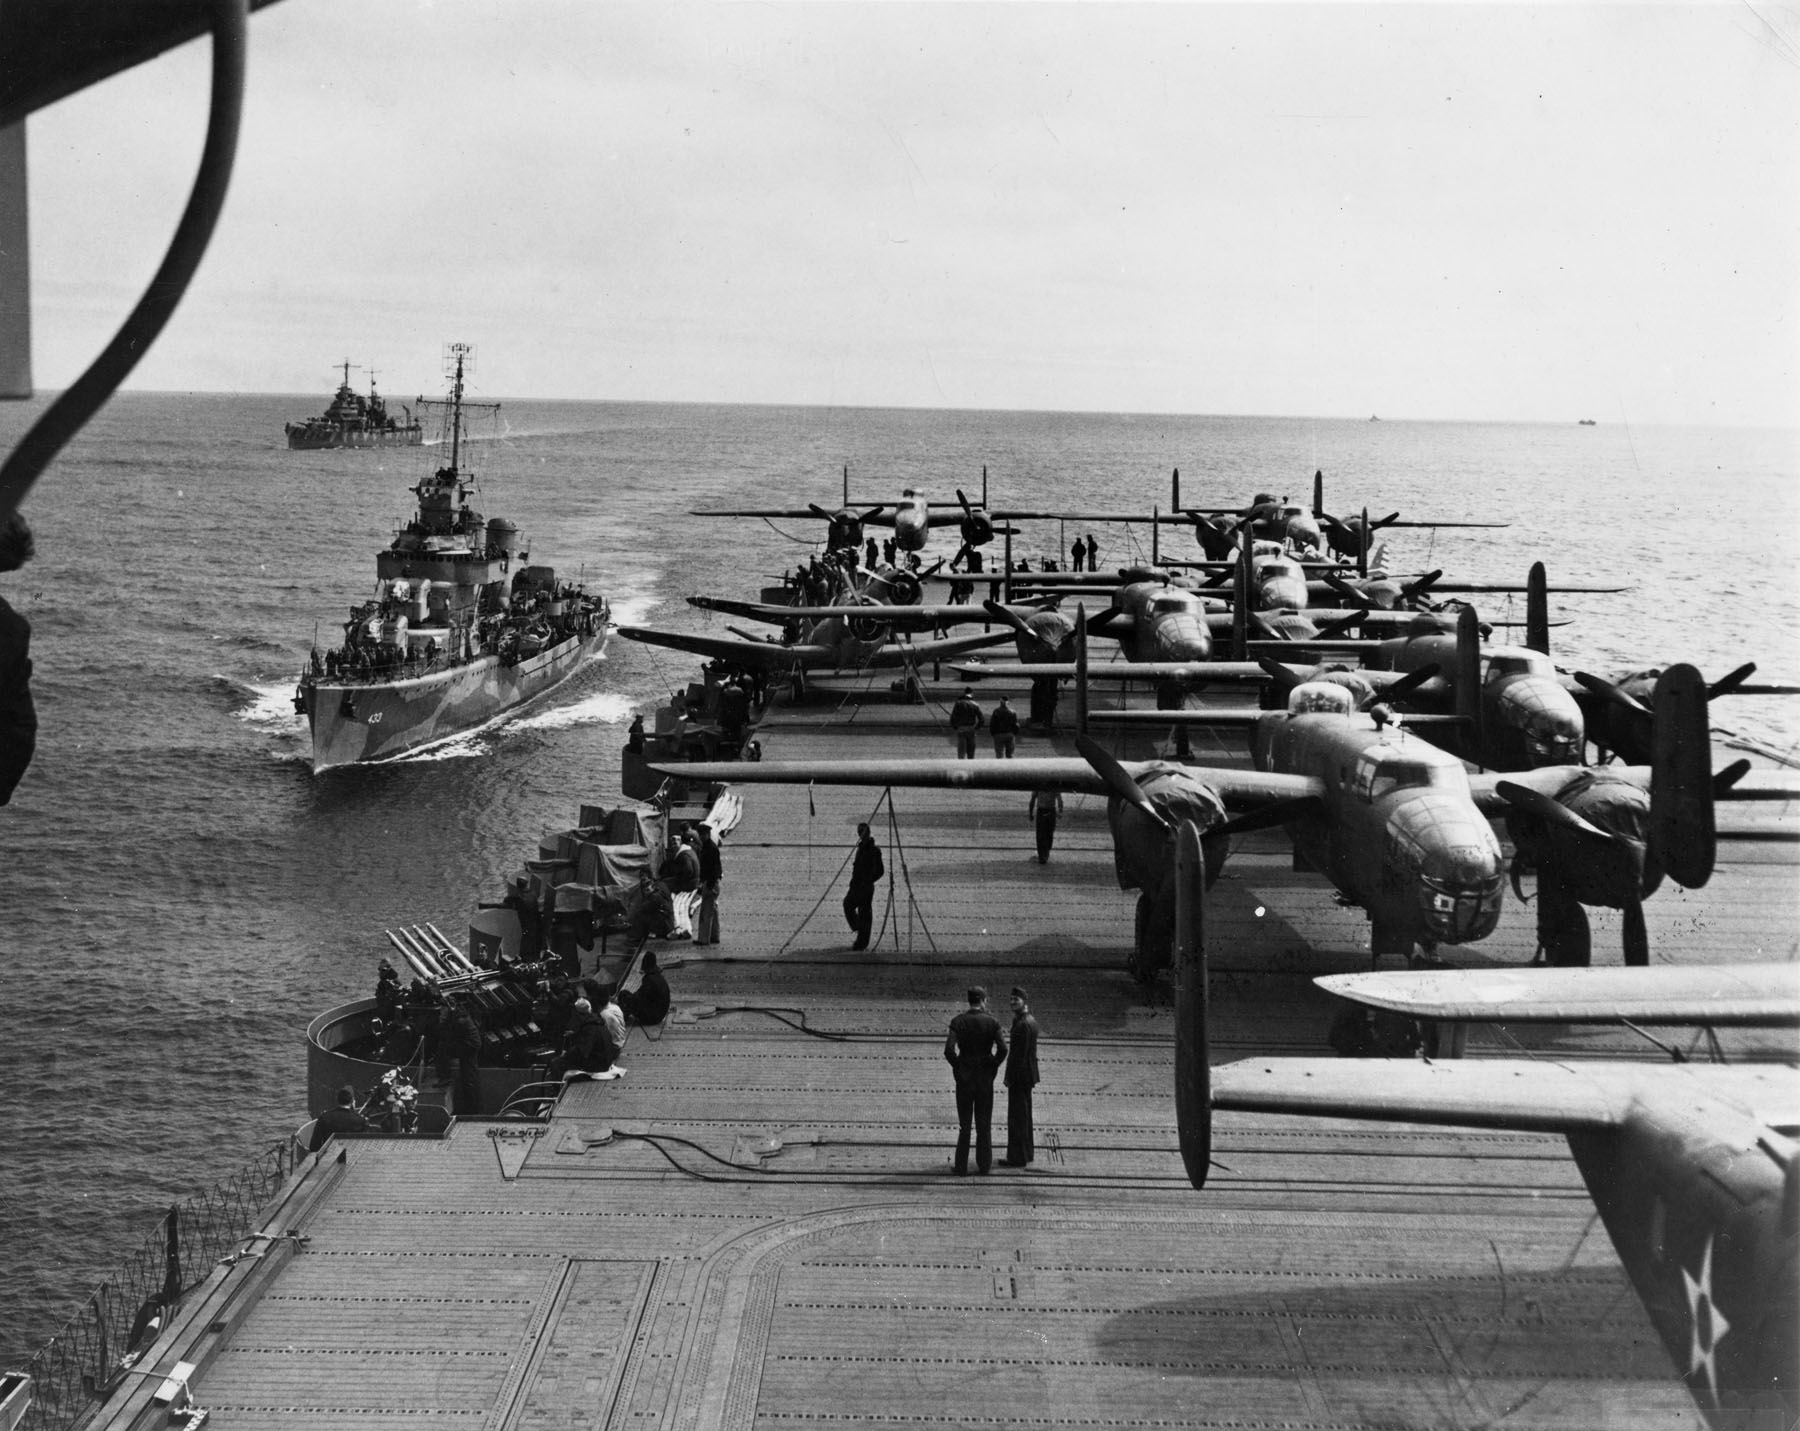 A pair of alert escorts follow the USS Hornet with carried 16 B-25 bombers for the ‘Doolittle Raid’ on April 18, 1942. US Air Force Photo